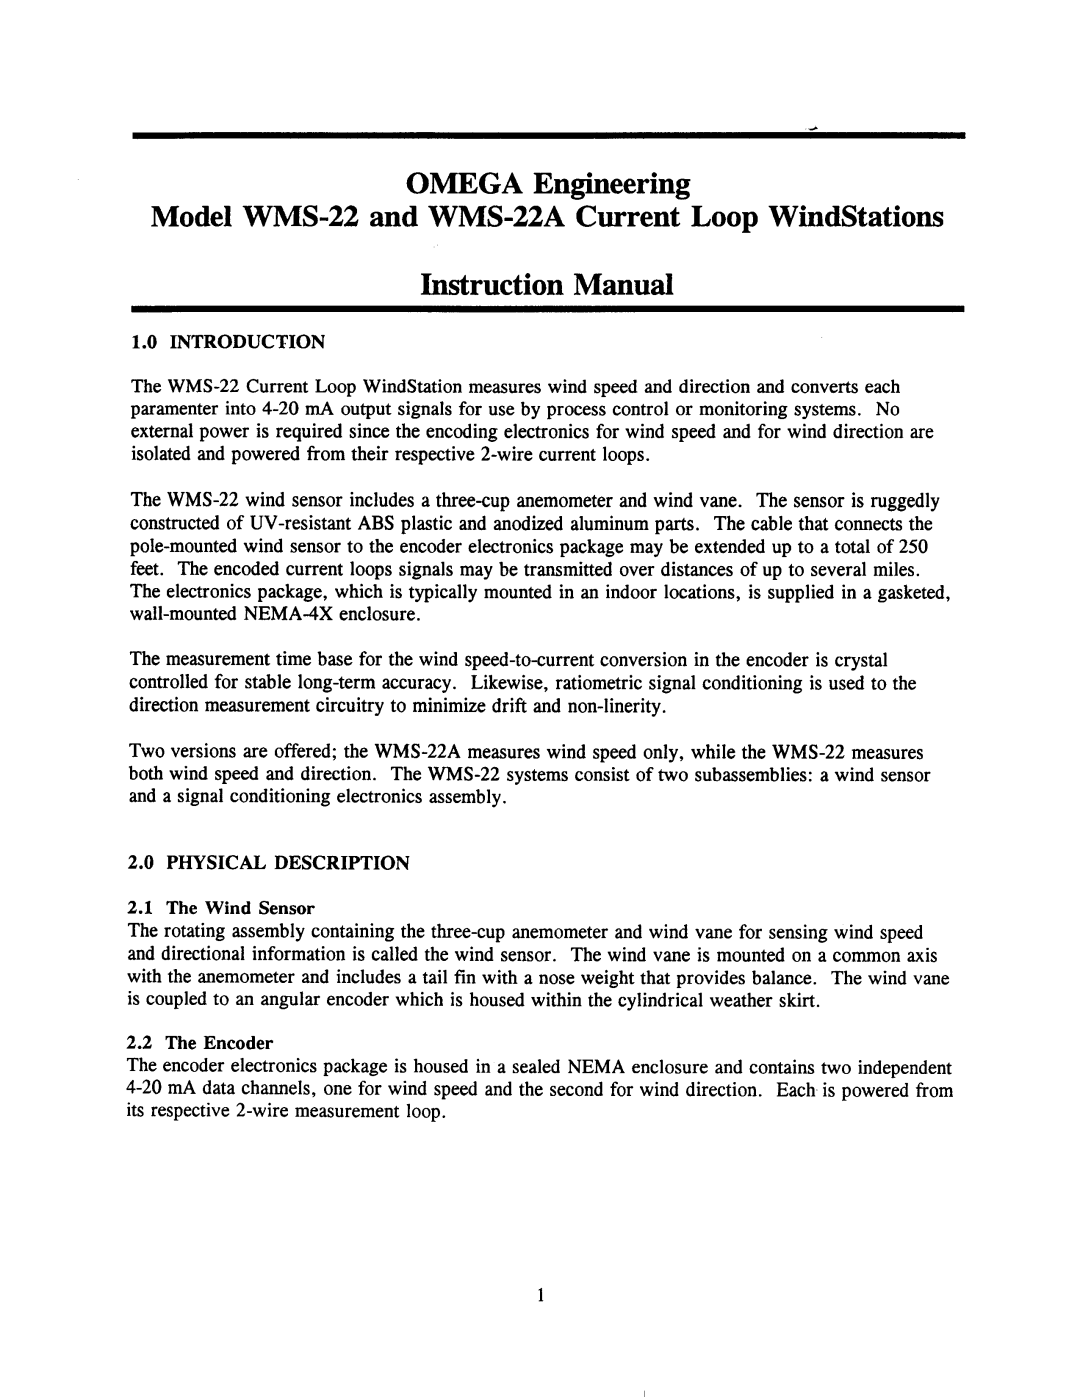 Omega Engineering manual OMEGA Engineering, Model WMS-22and WMS-22ACurrent Loop WindStations, Introduction, The Encoder 